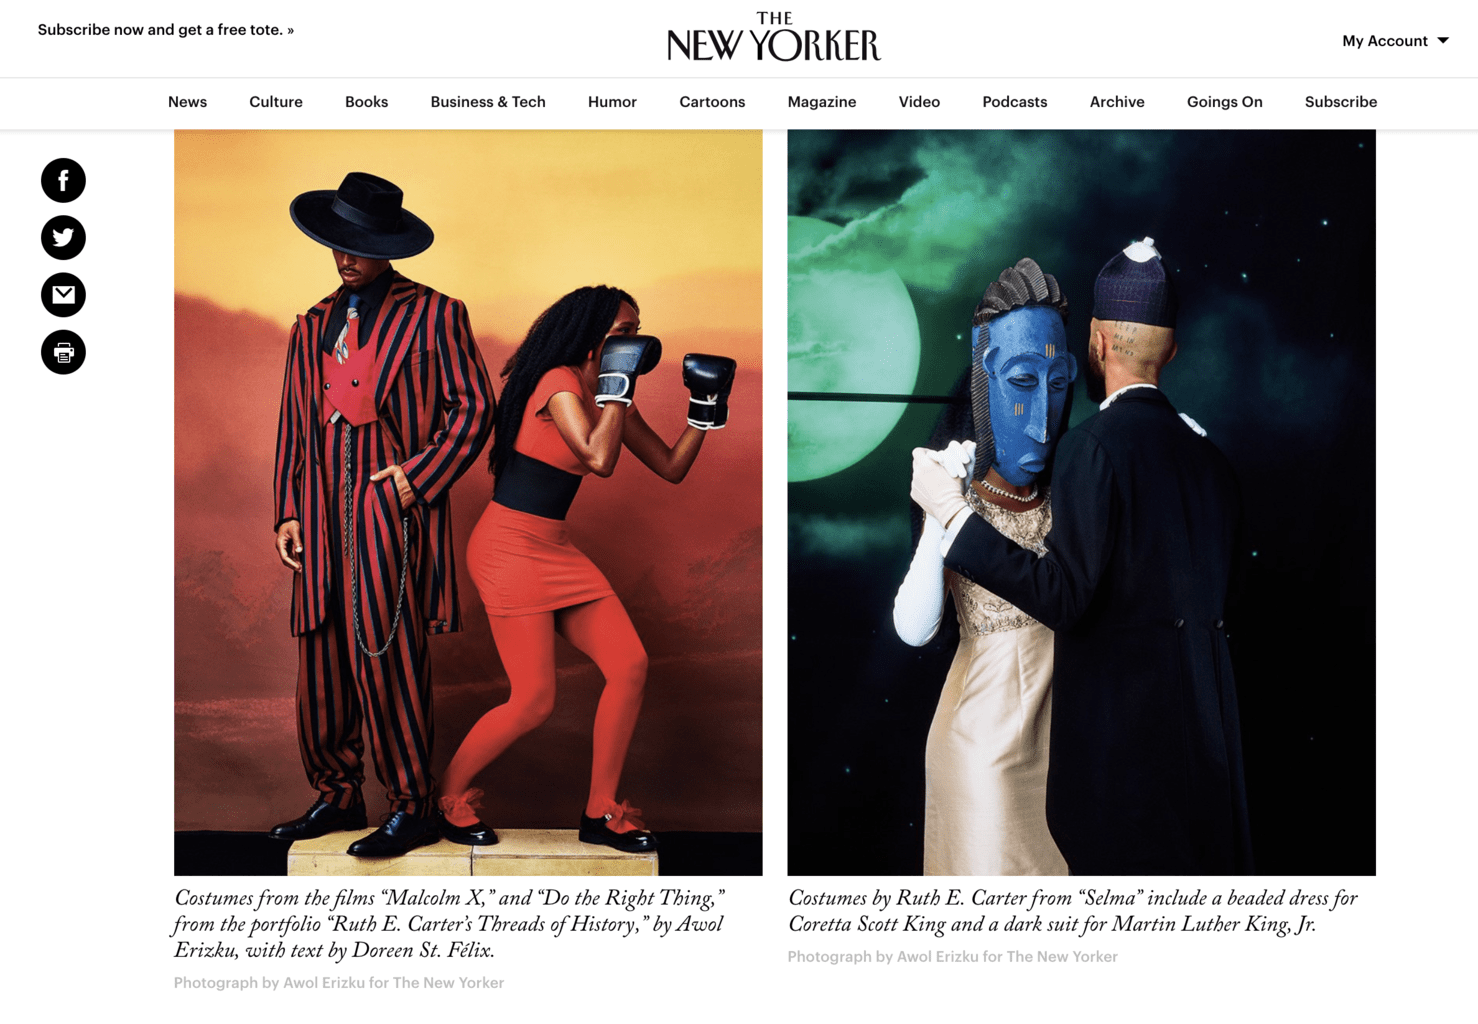 The New Yorker prominently featured Awol Erizku's work in their 2018 Best Photos feature